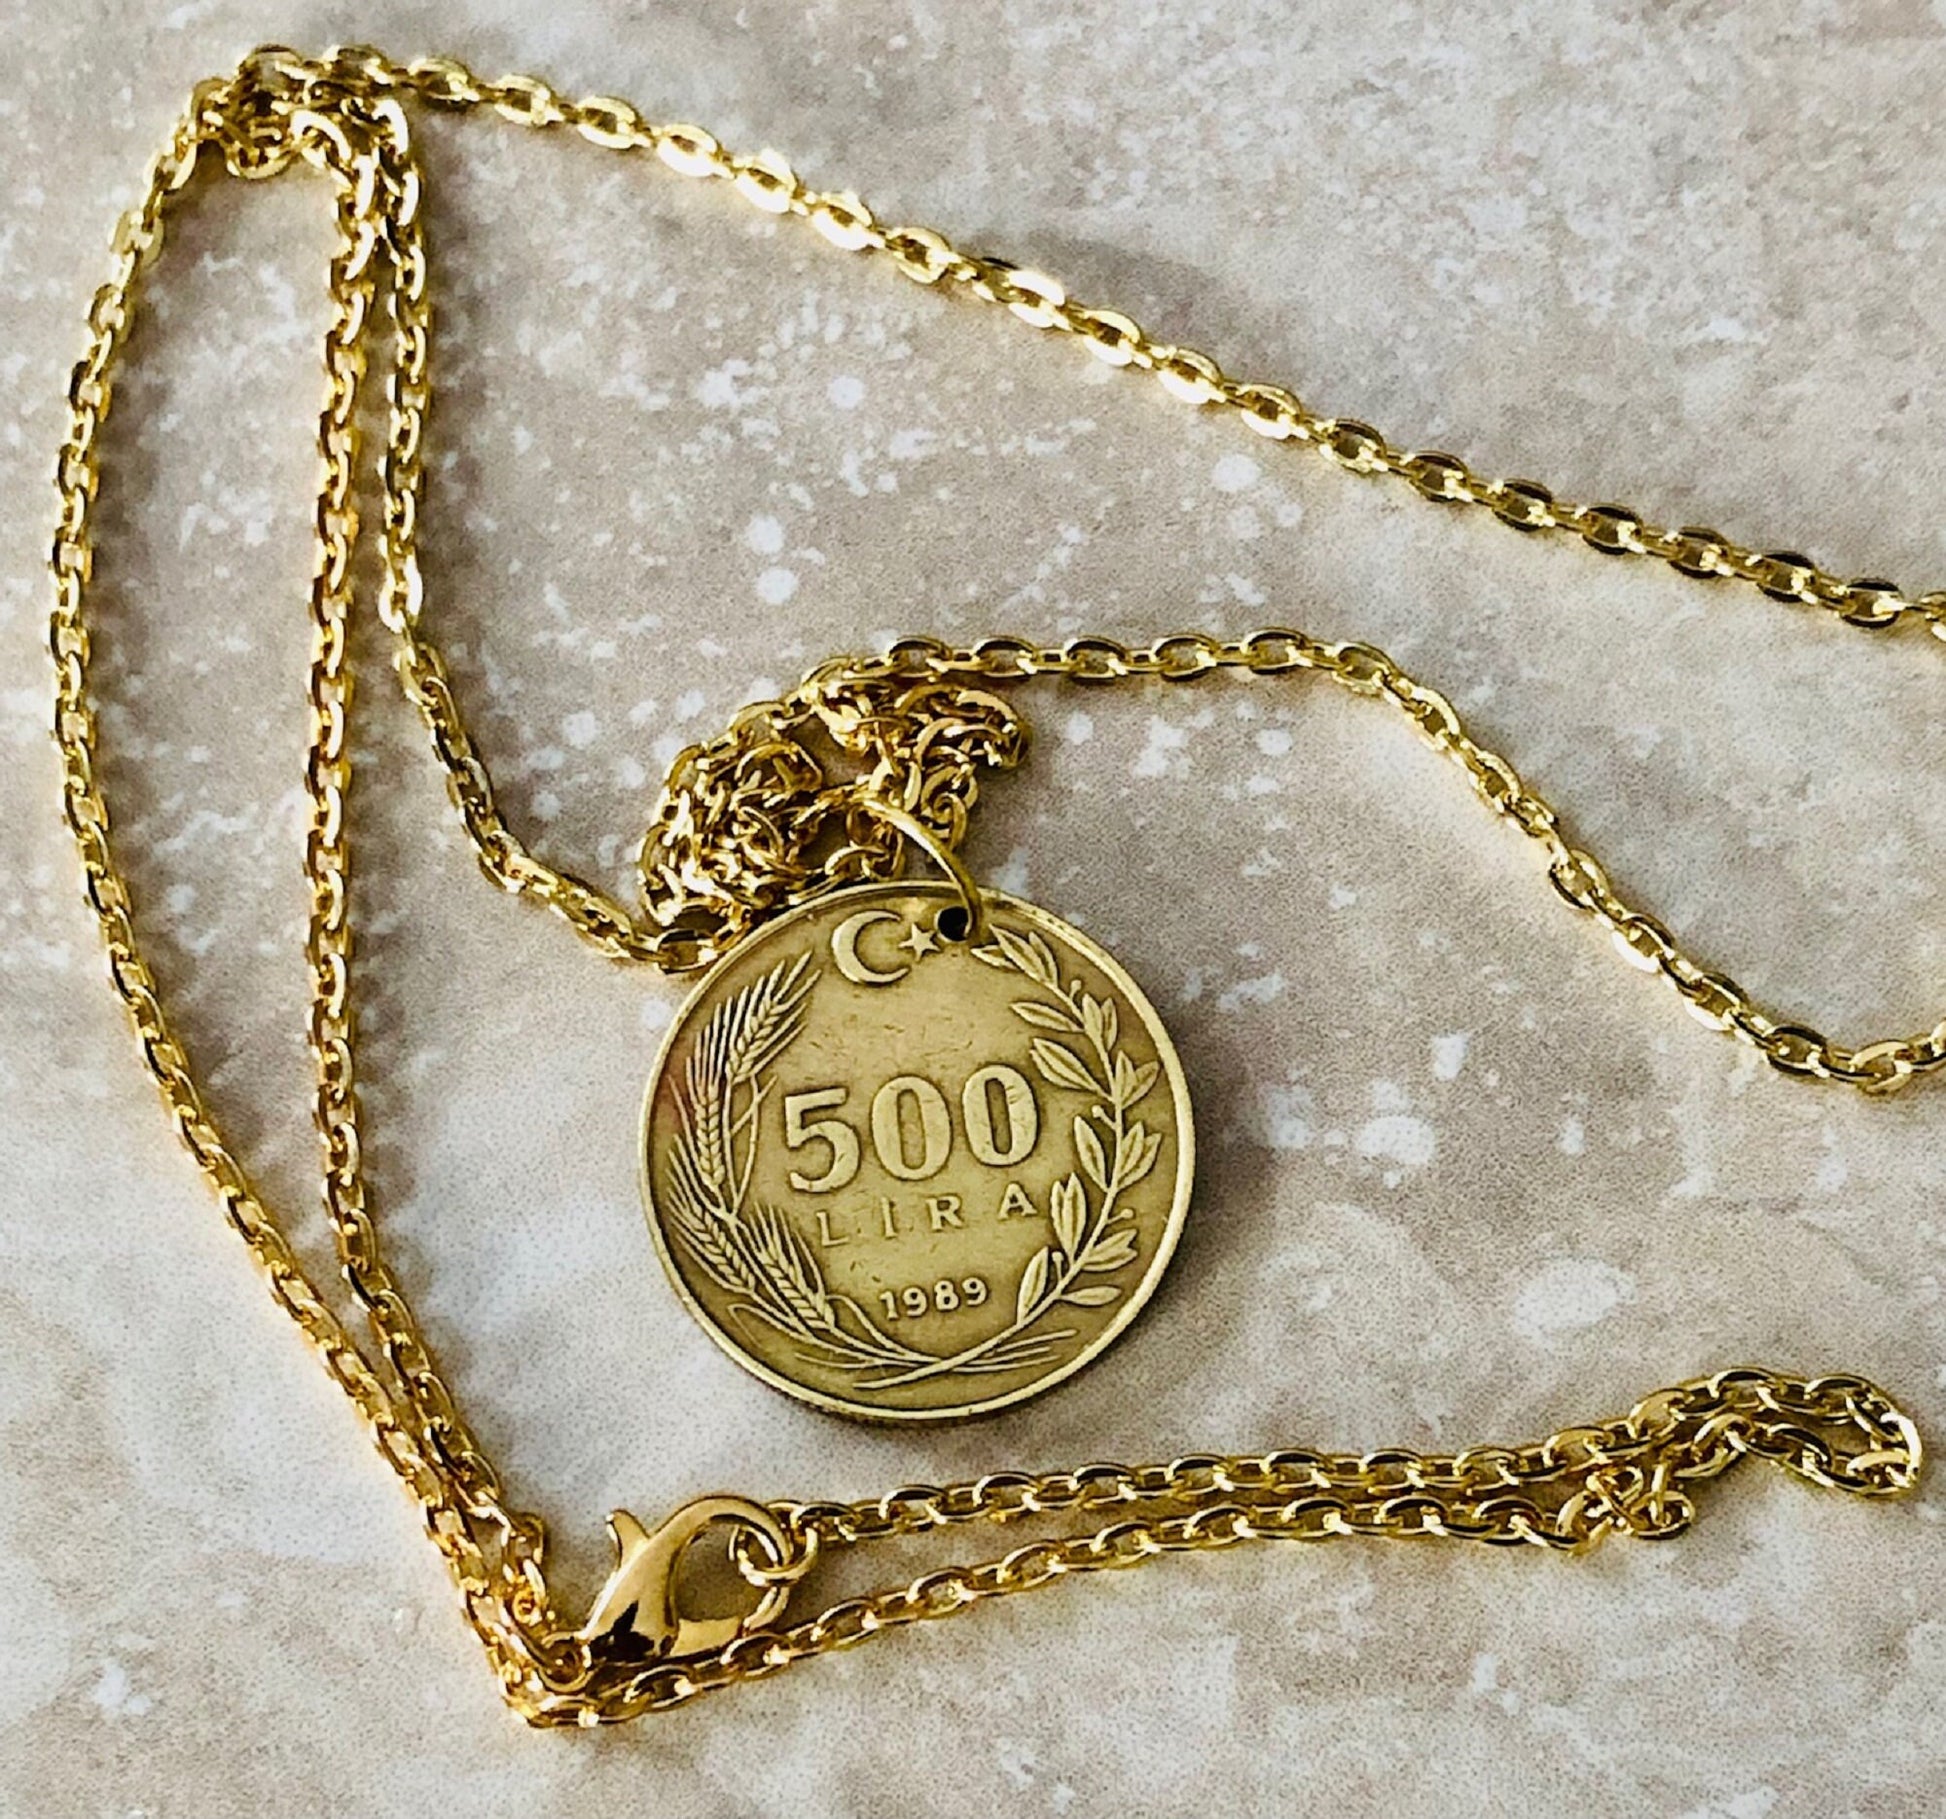 Turkey Coin Necklace Turkish 500 Lira Pendant Personal Old Vintage Handmade Jewelry Gift Friend Charm For Him Her World Coin Collector